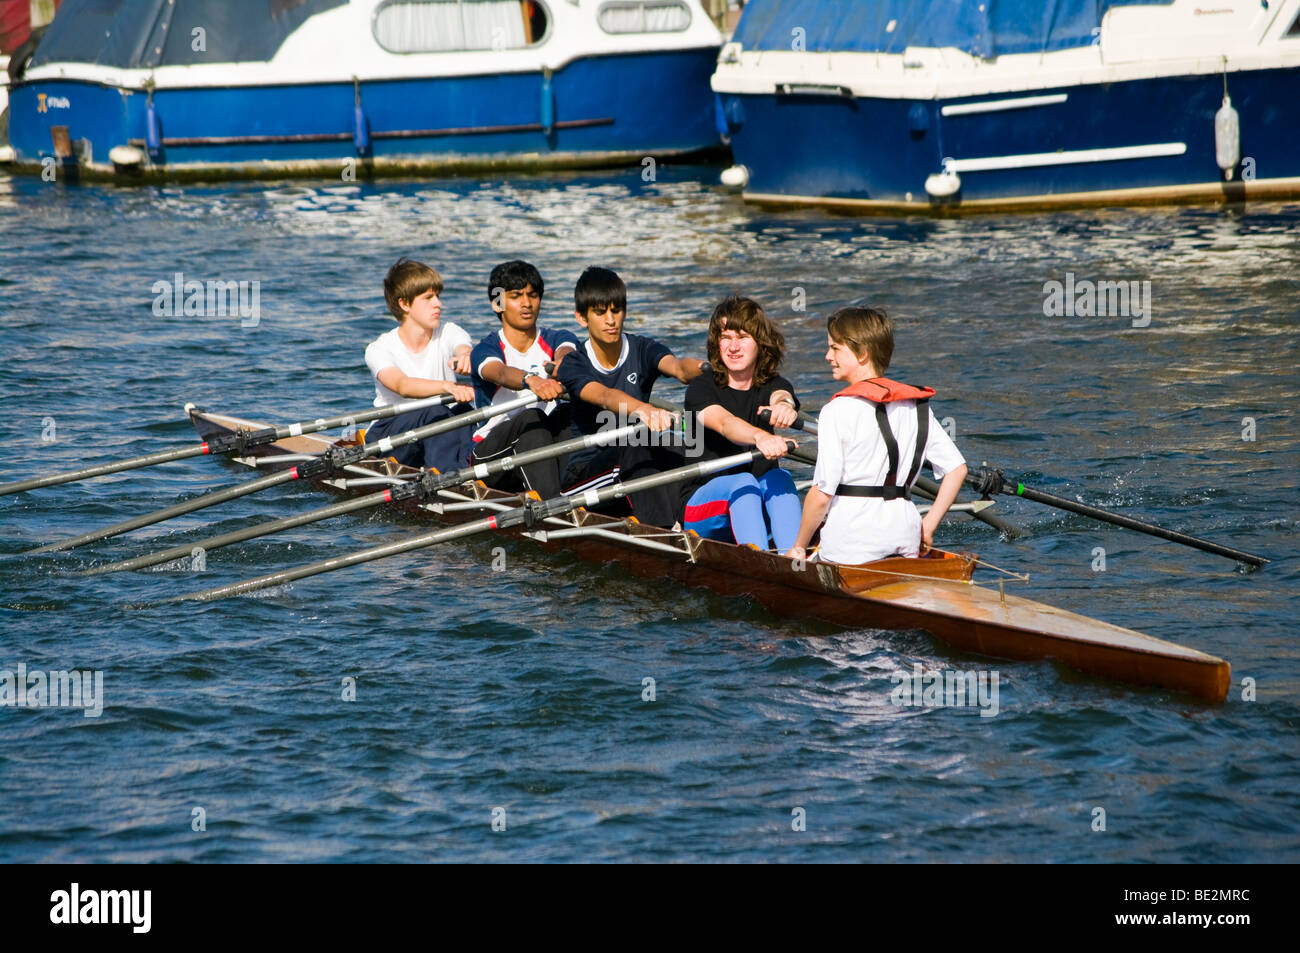 People Rowers Crew Rowing A Coxed 4 Man Scull Boat On The River Thames Kingston Surrey England Stock Photo